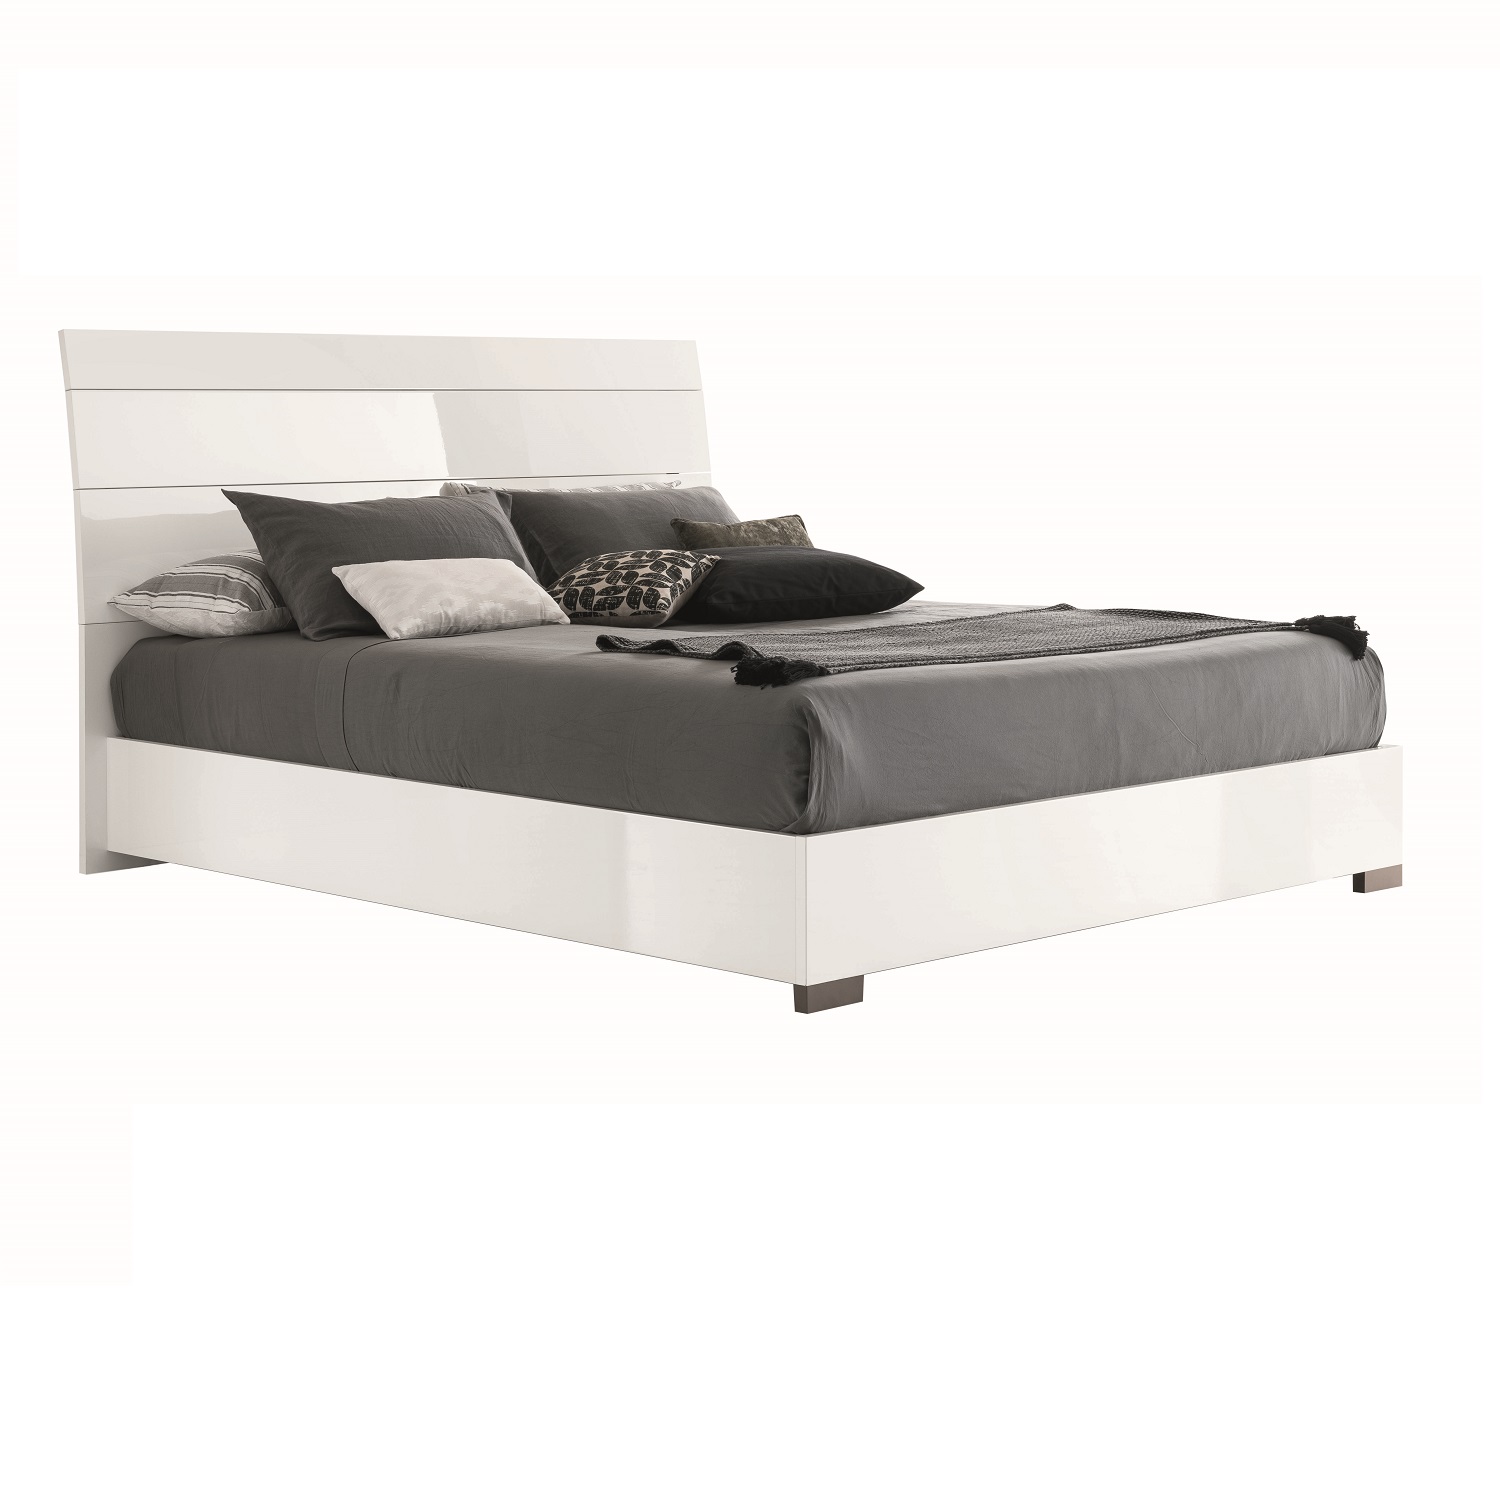 WEISS King Bed